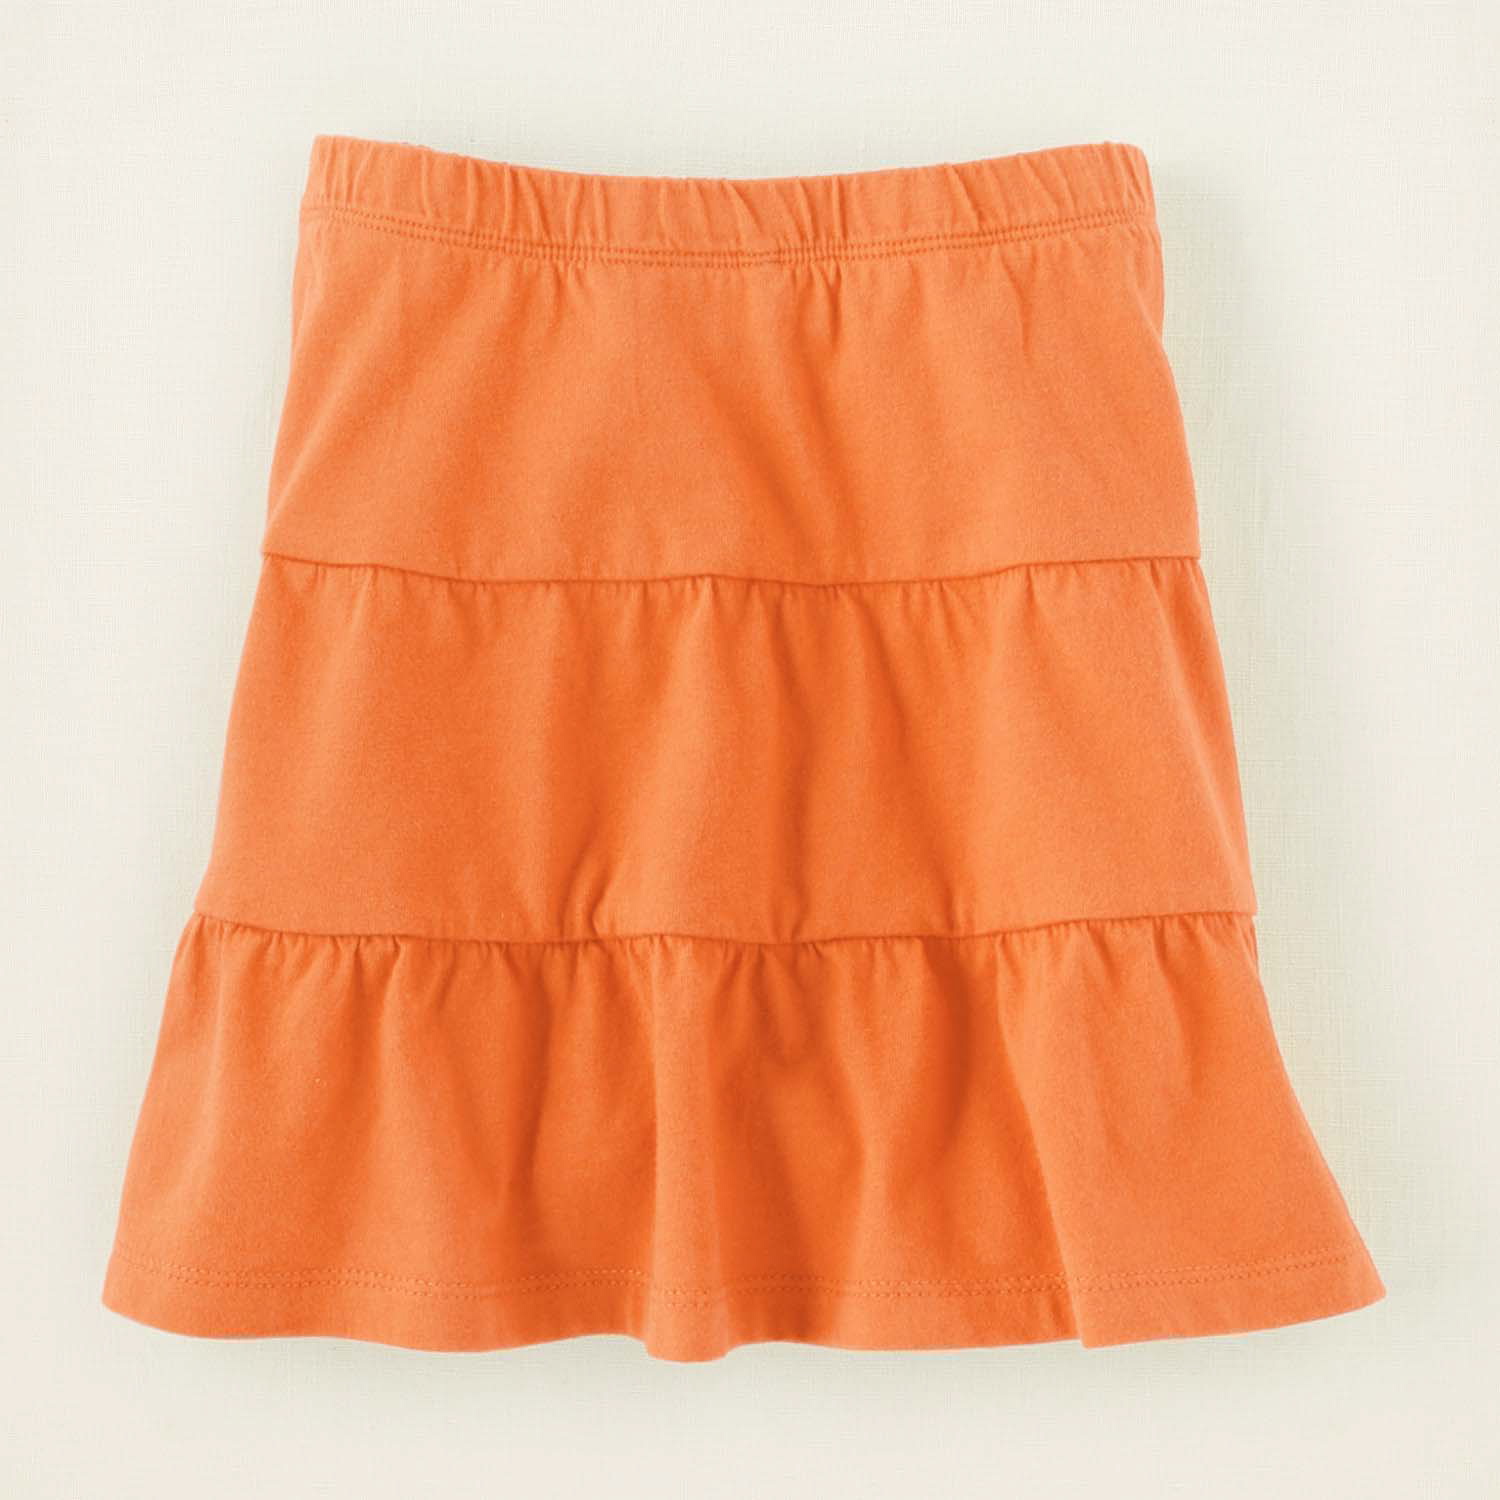 This product image released by The Children's Place shows an orange neon skirt. Unlike so many looks that trickled down from the designer runways into mass retailers and into teenagers' closets, the almost electrifying shades of pink, green, yellow and orange have been hanging out in high school hallways for a while.